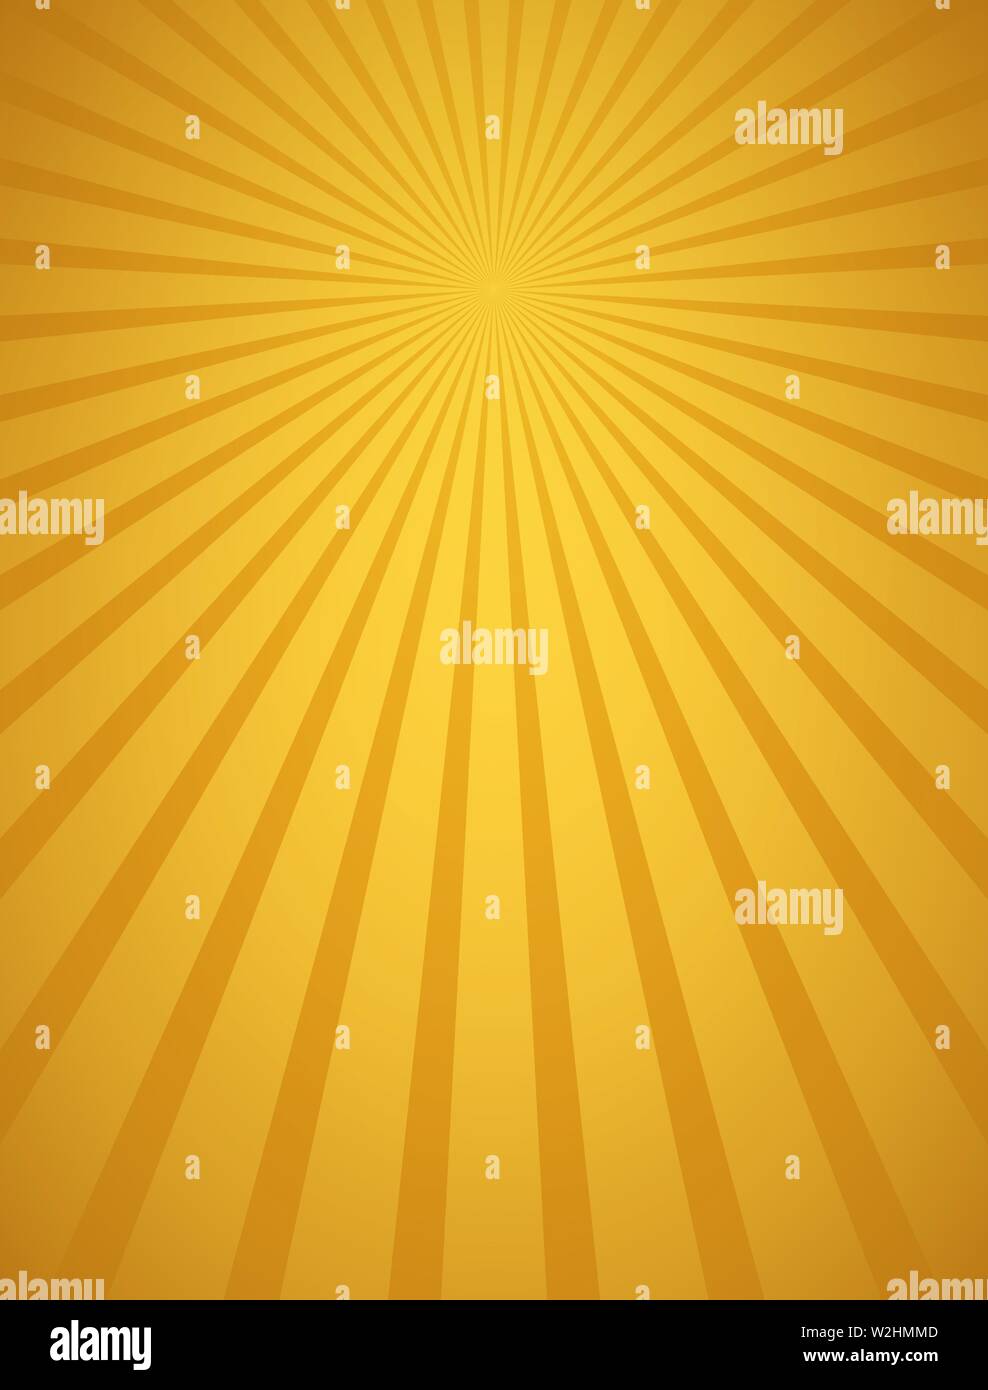 Golden sun with many rays vector illustration abstract retro background Stock Vector